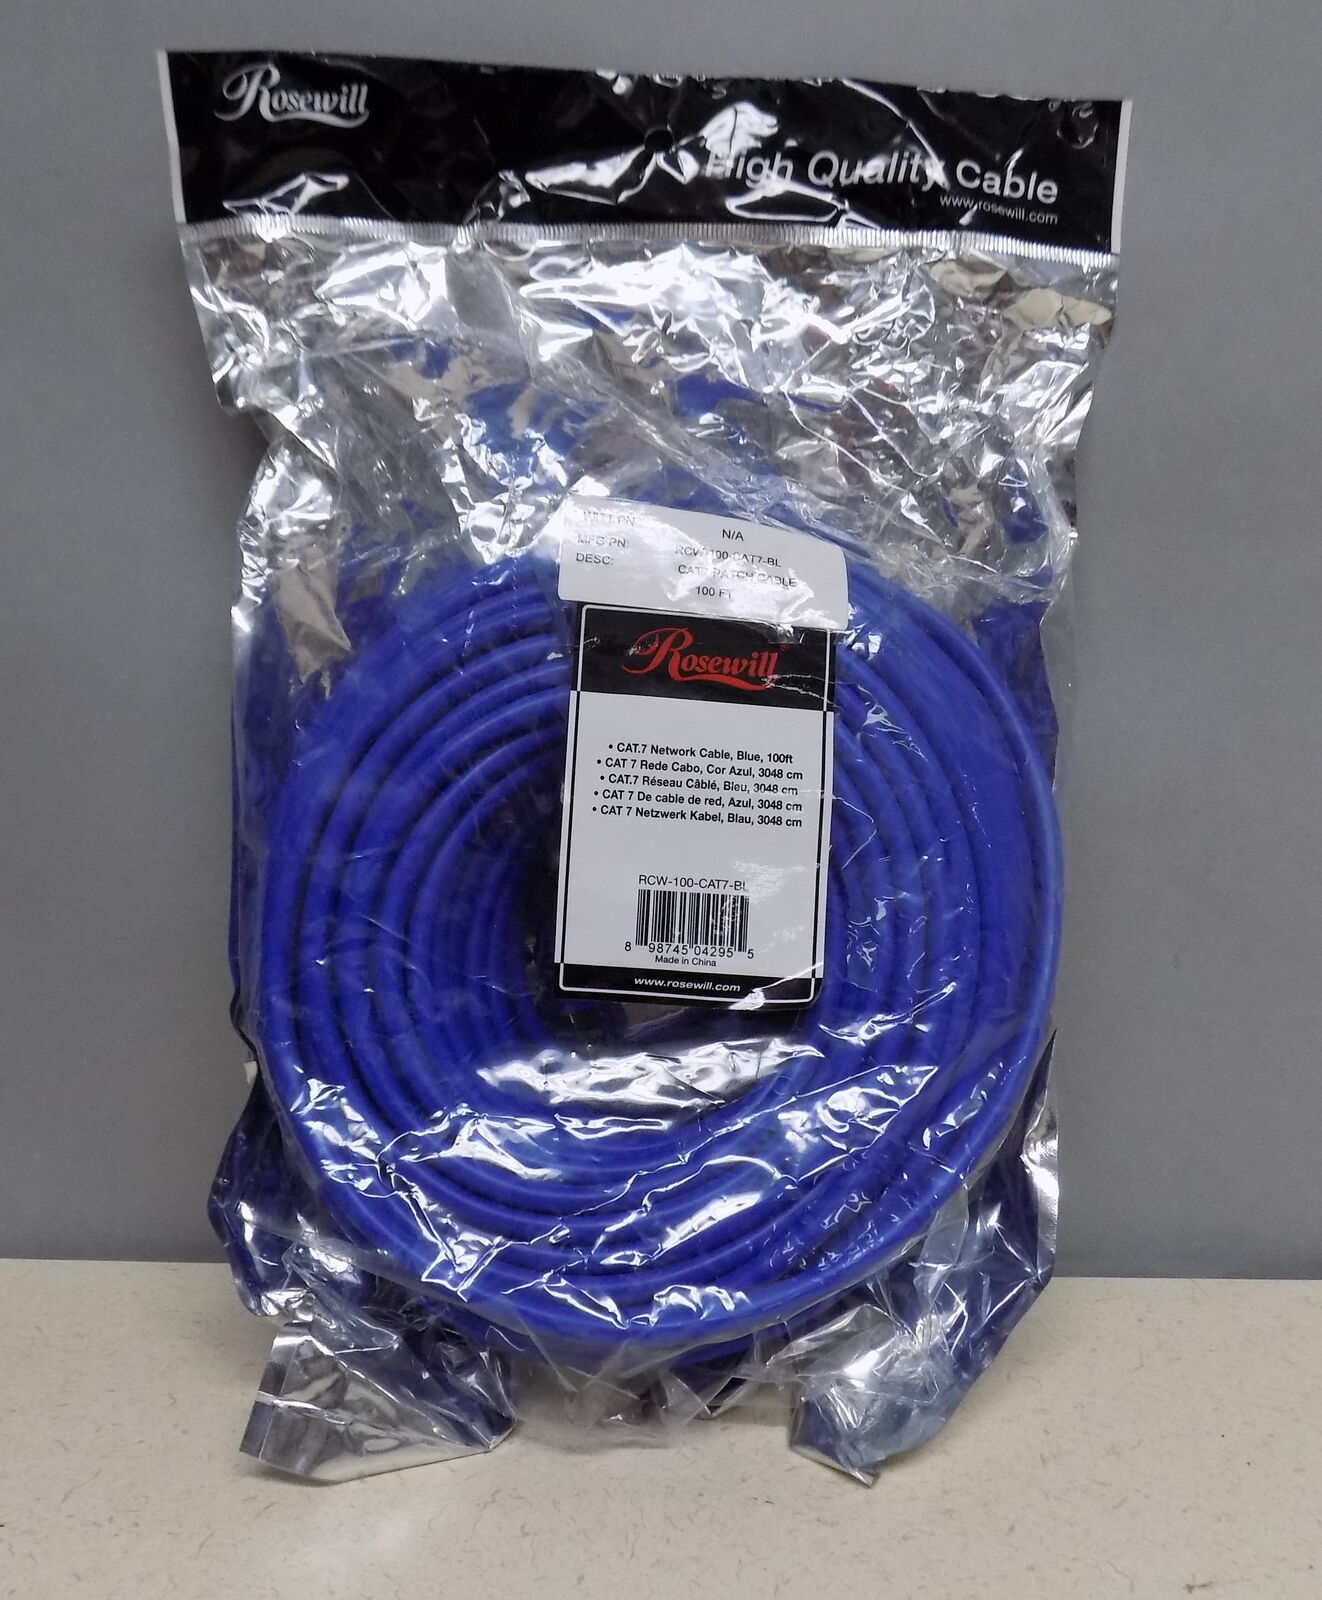 Rosewill High Quality Cable Part# RCW-100-CAT7-BL CAT7 Patch Cable 100Ft. 